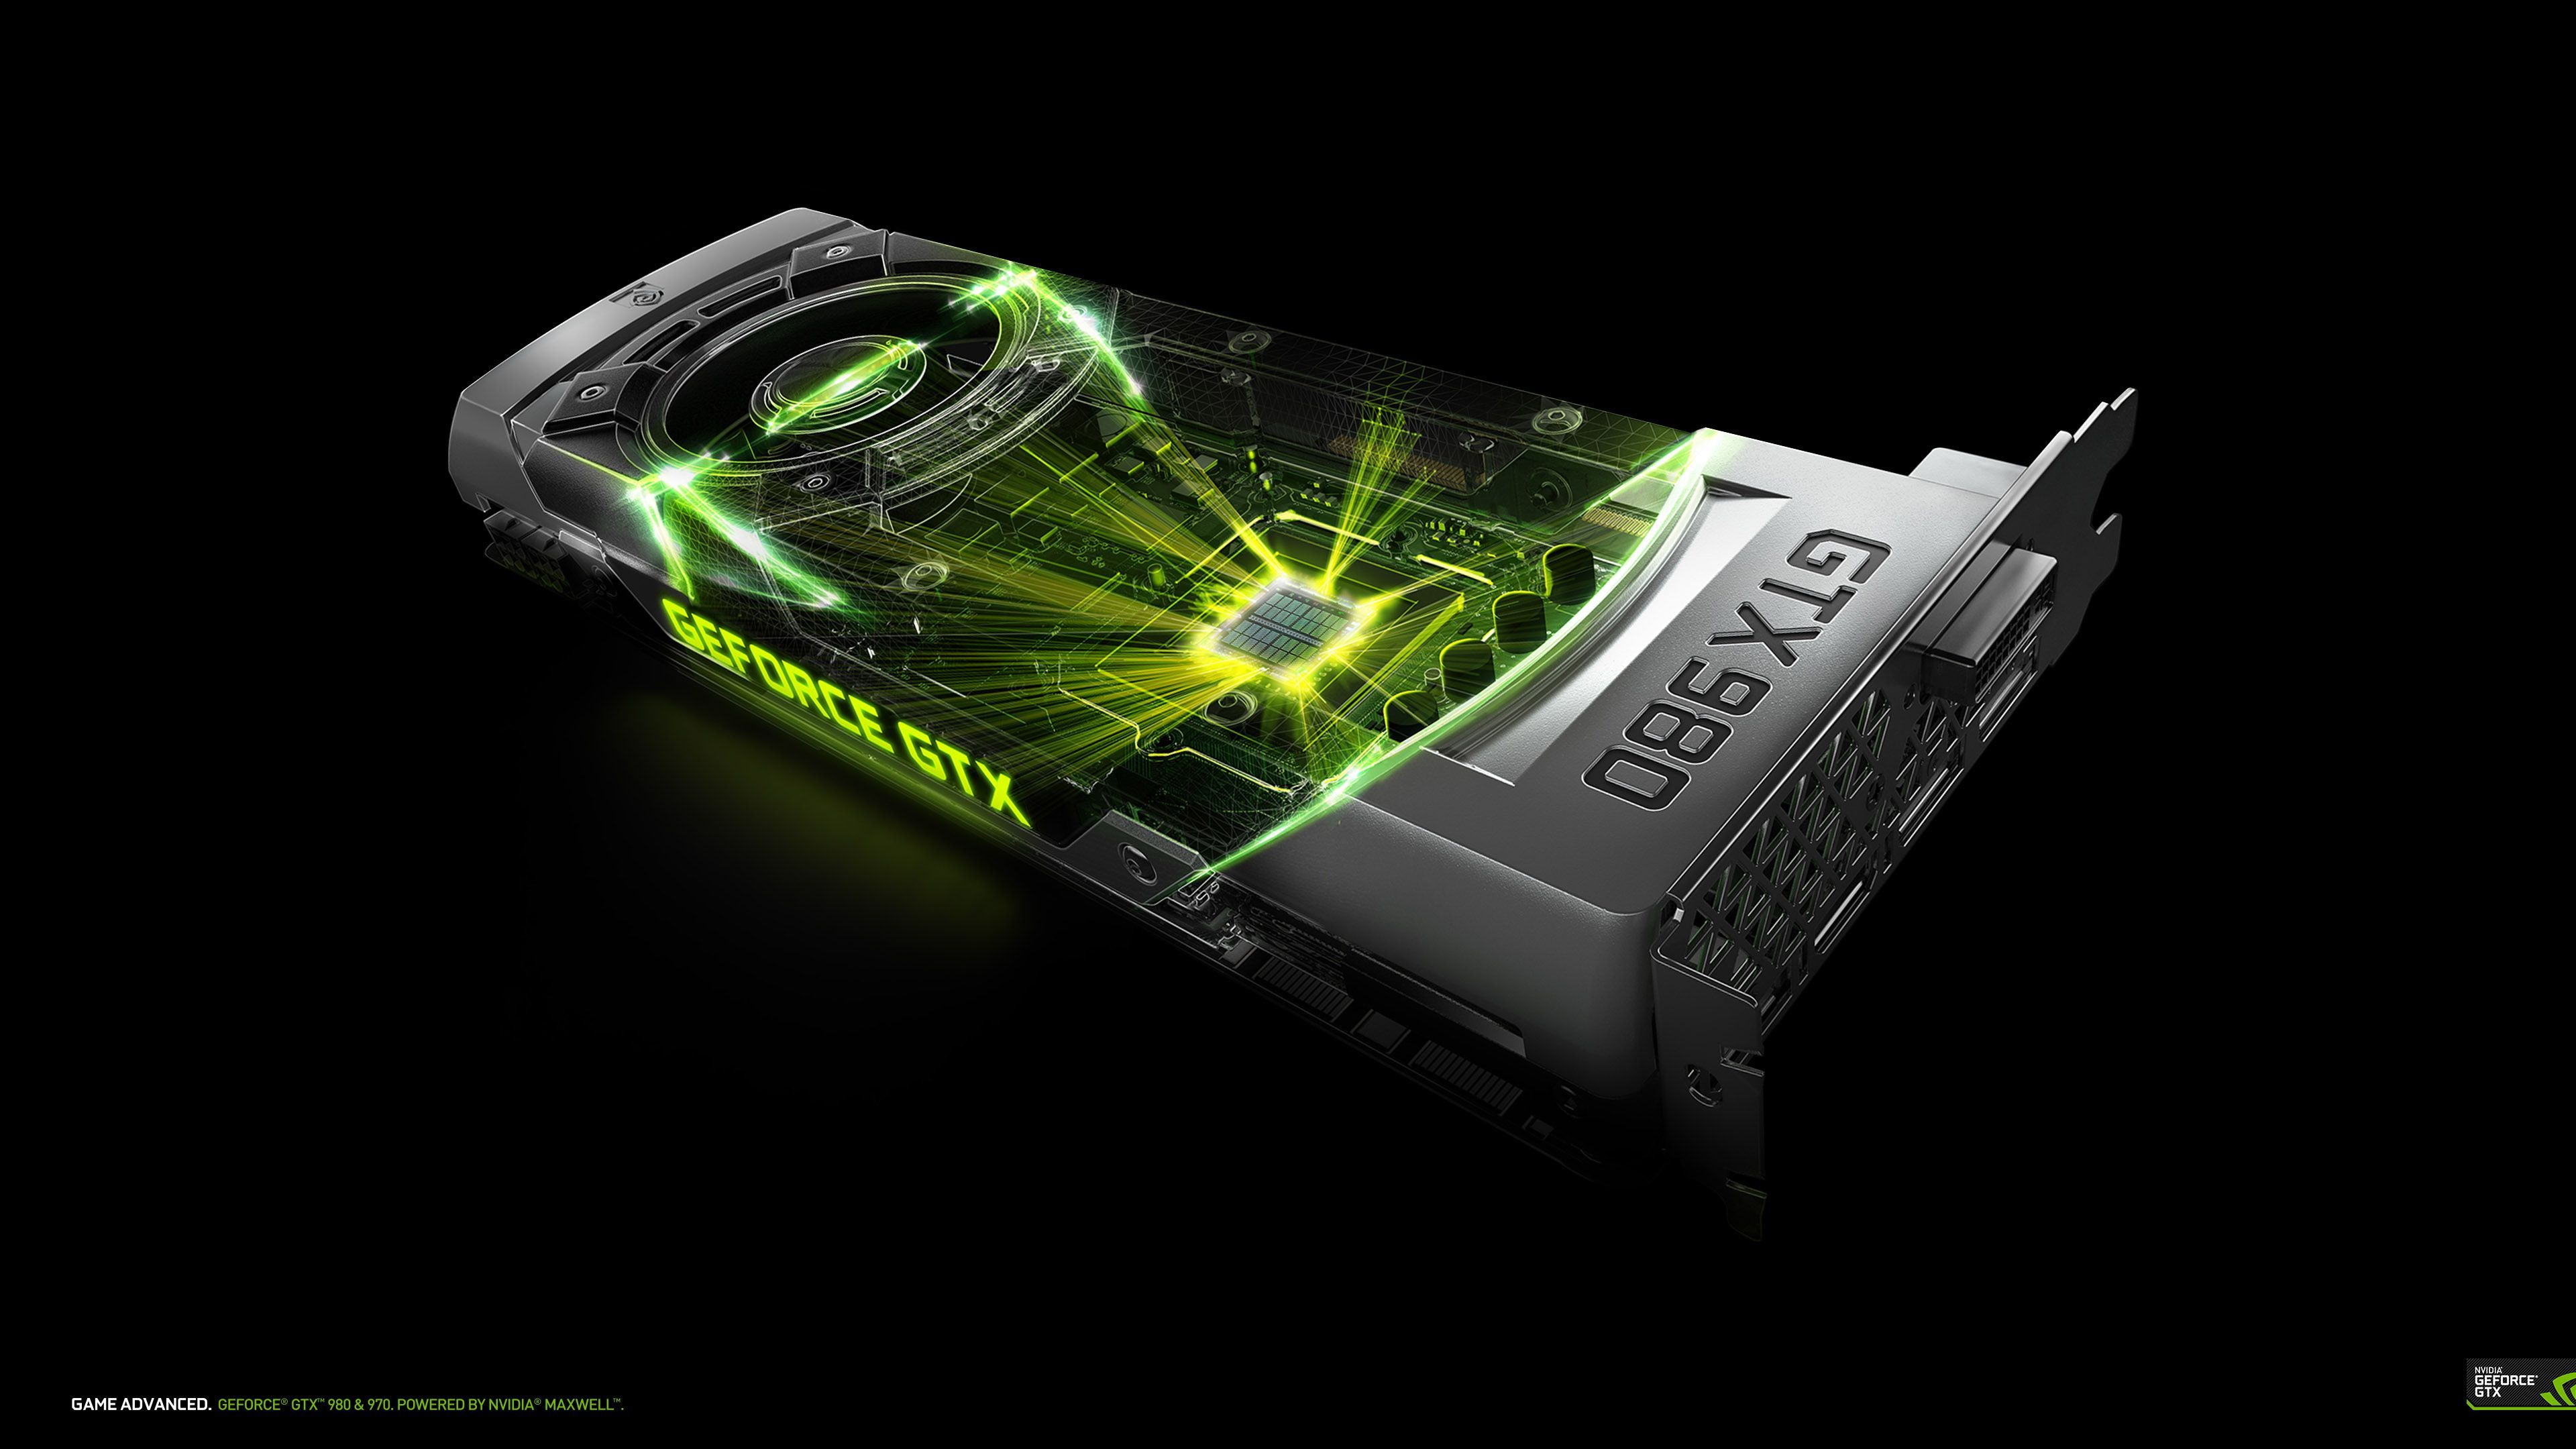 Game Advanced: Download The Amazing New GeForce GTX 980 & 970 ...